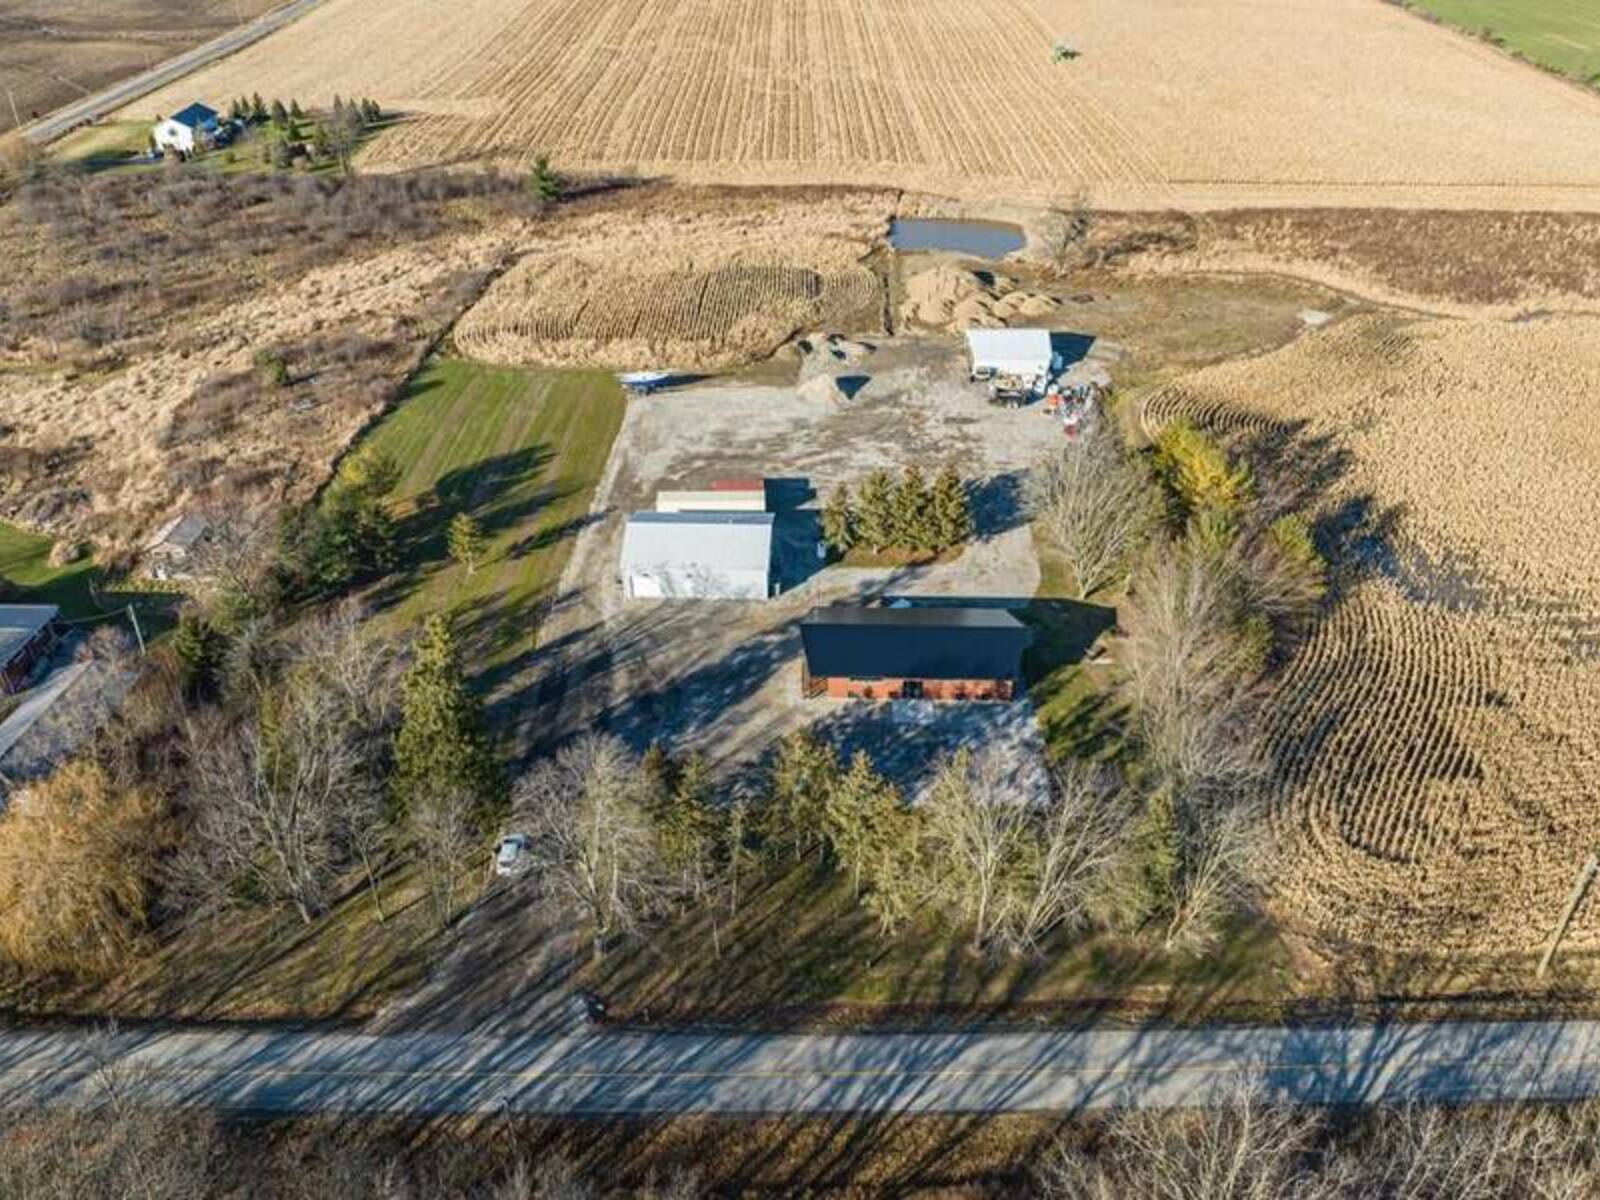 681 Concession 2 Road, Dunnville, Ontario N1A 2W4